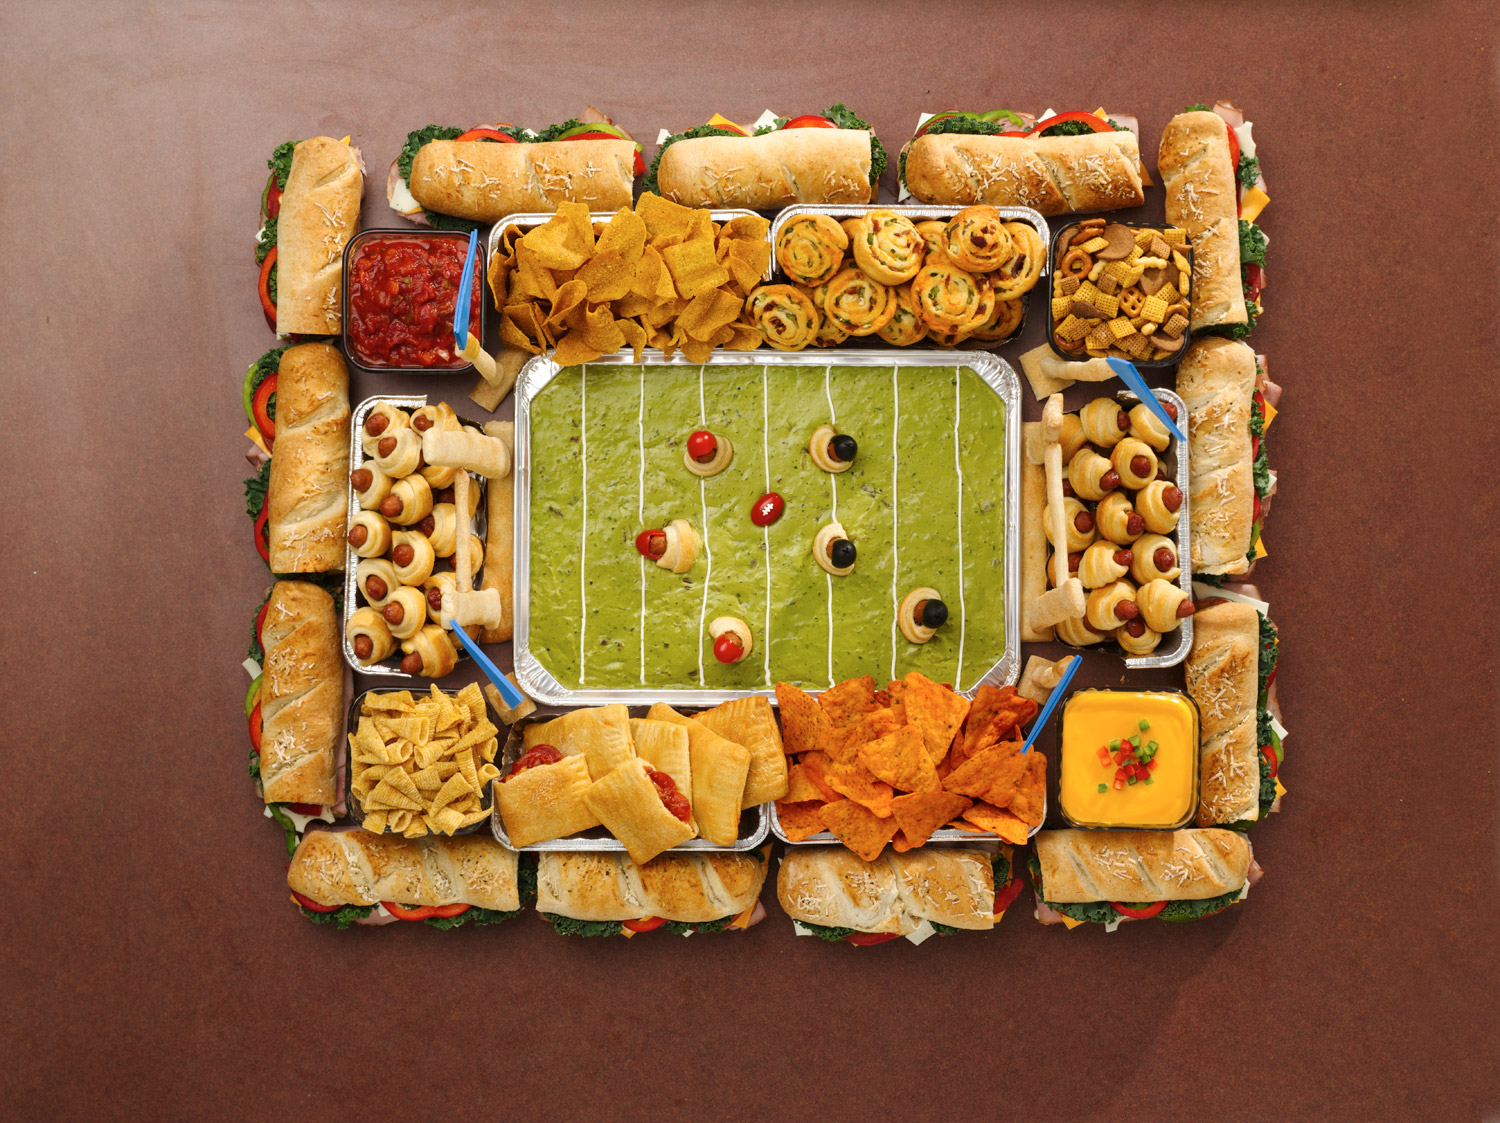 Snackcadium party tray for Super Bowl